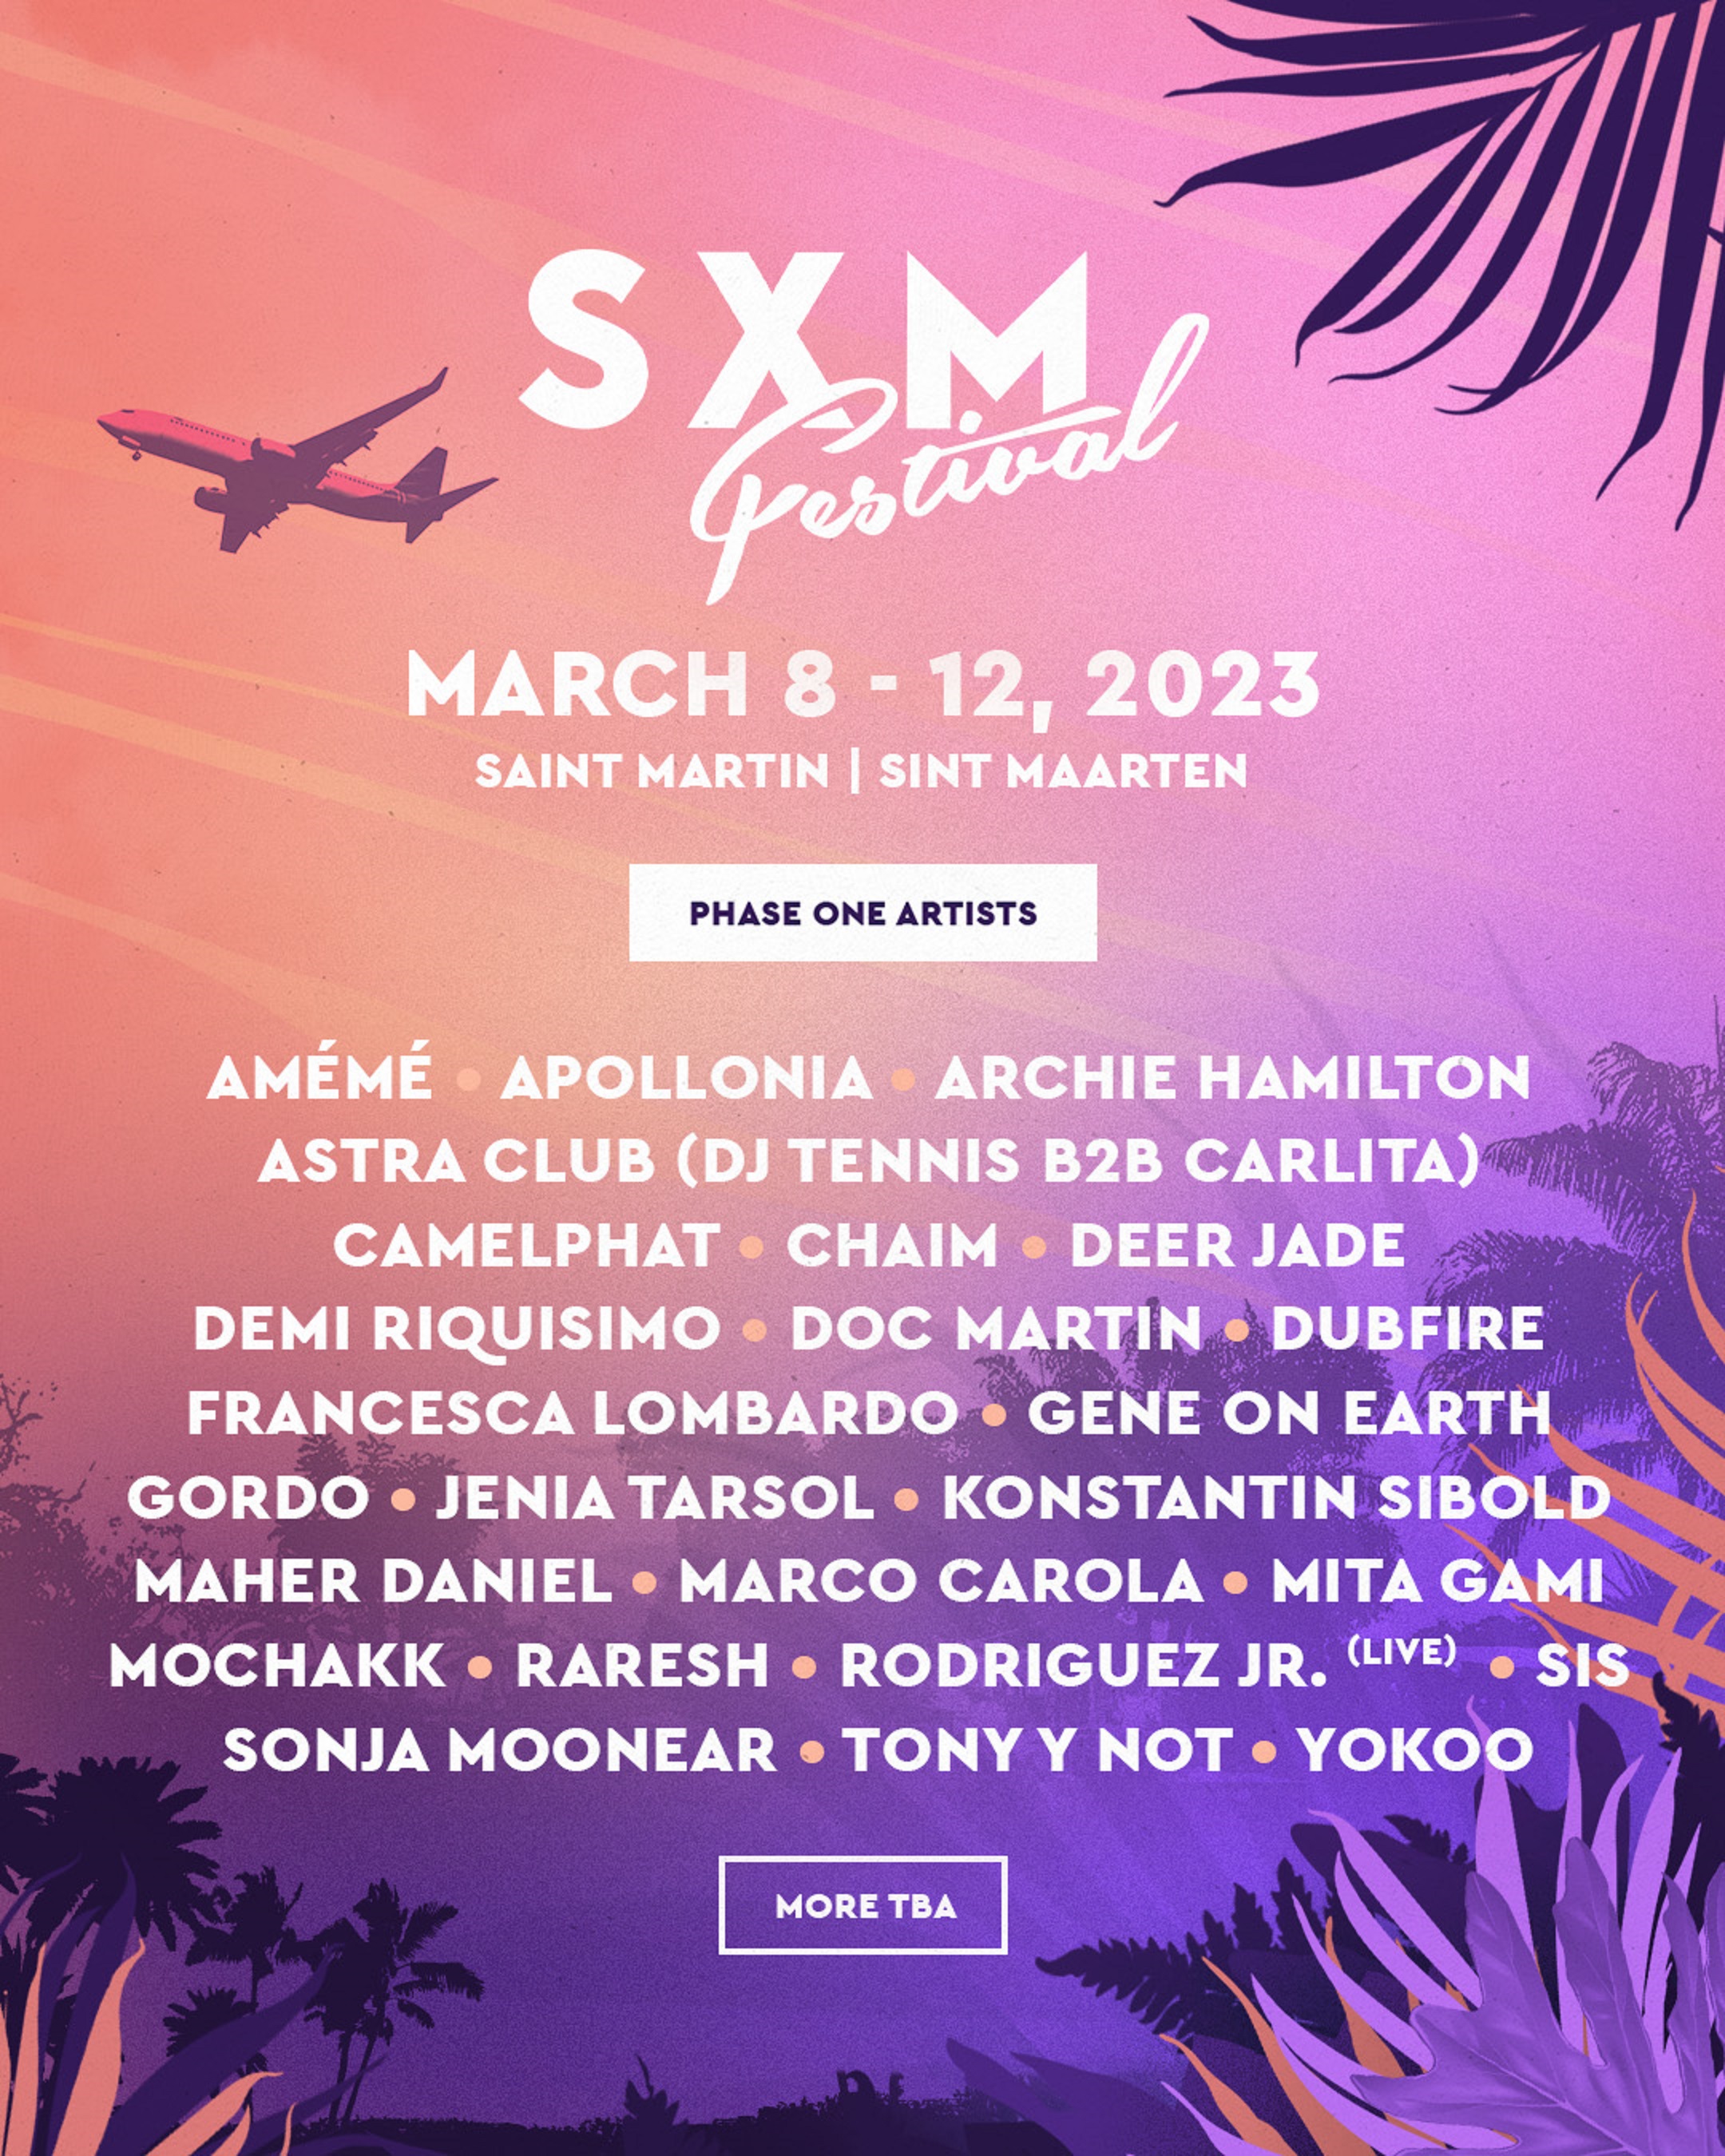 SXM Festival Returns for Another Stunning Edition in 2023